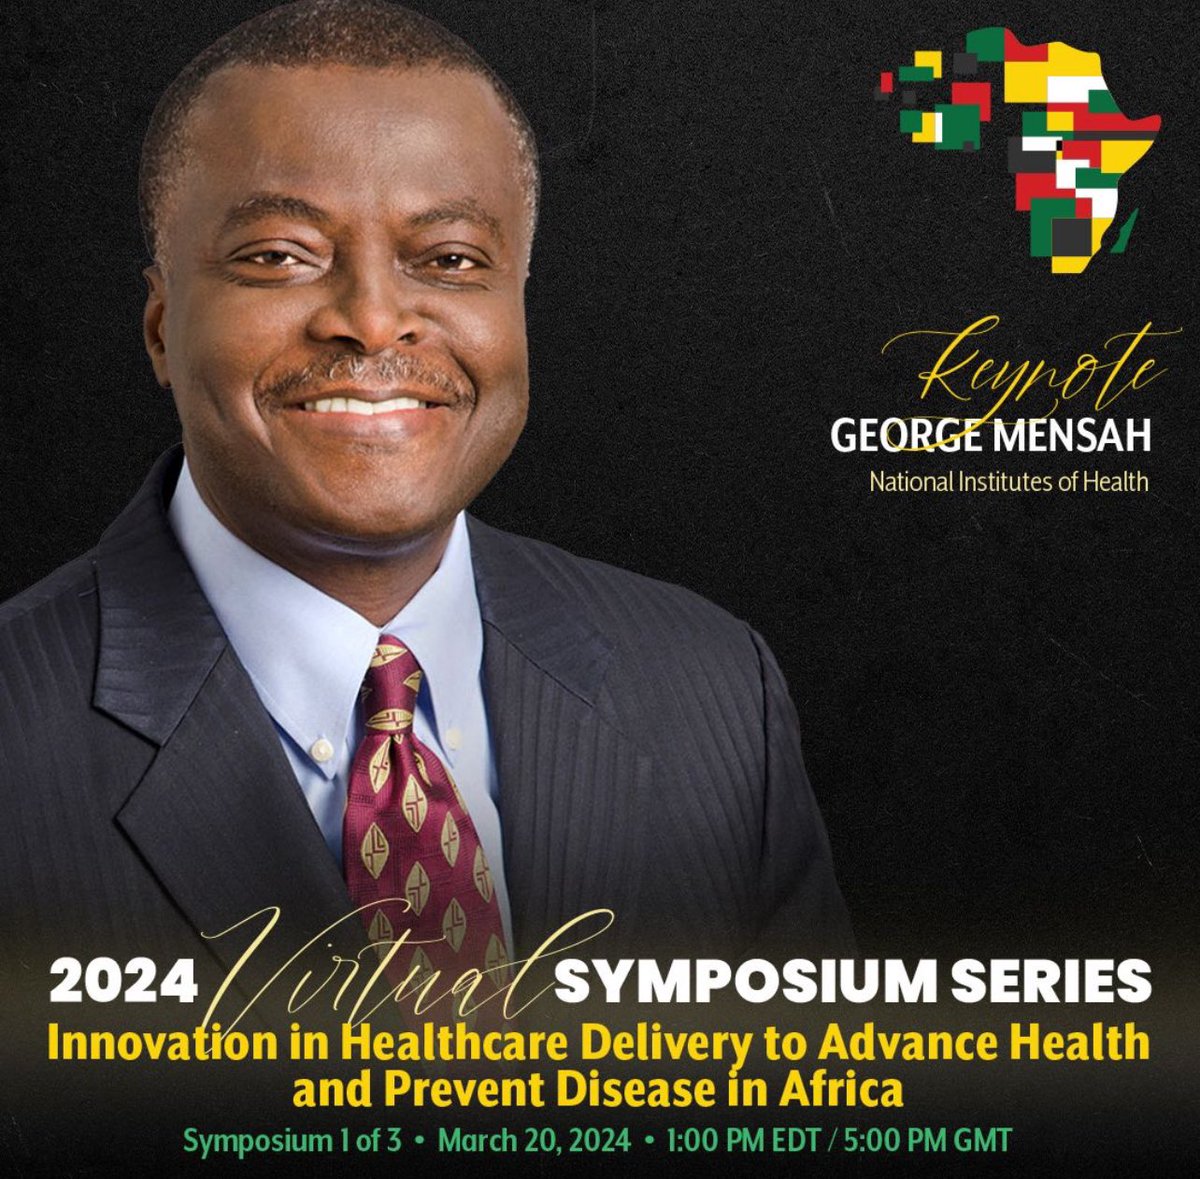 Join us tomorrow, March 20th at 1PM EDT / 5PM GMT, for this virtual symposium on 'Innovation in Healthcare Delivery to Advance Health and Prevent Disease in Africa'. Keynote by: Dr. George Mensah @NHLBI_Translate @NIH Link to Register: nbnfoundation.us/aghconf/ @nbnfoundationus